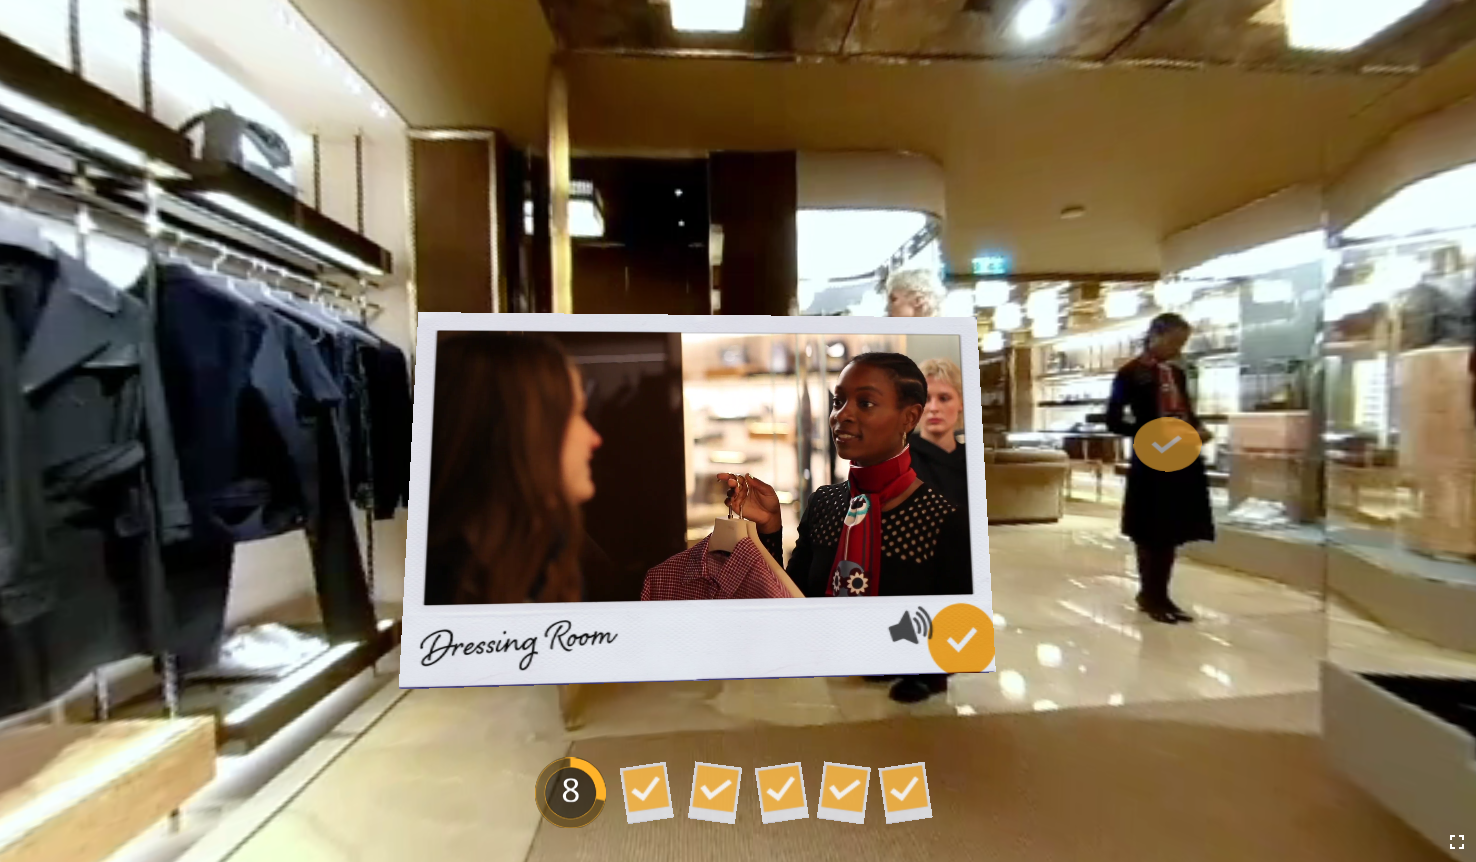 Image from a mobile-friendly, immersive 360 training course created for Fendi. Polaroid-style frame with a video inside it showing a customer leaving clothes in a dressing room.